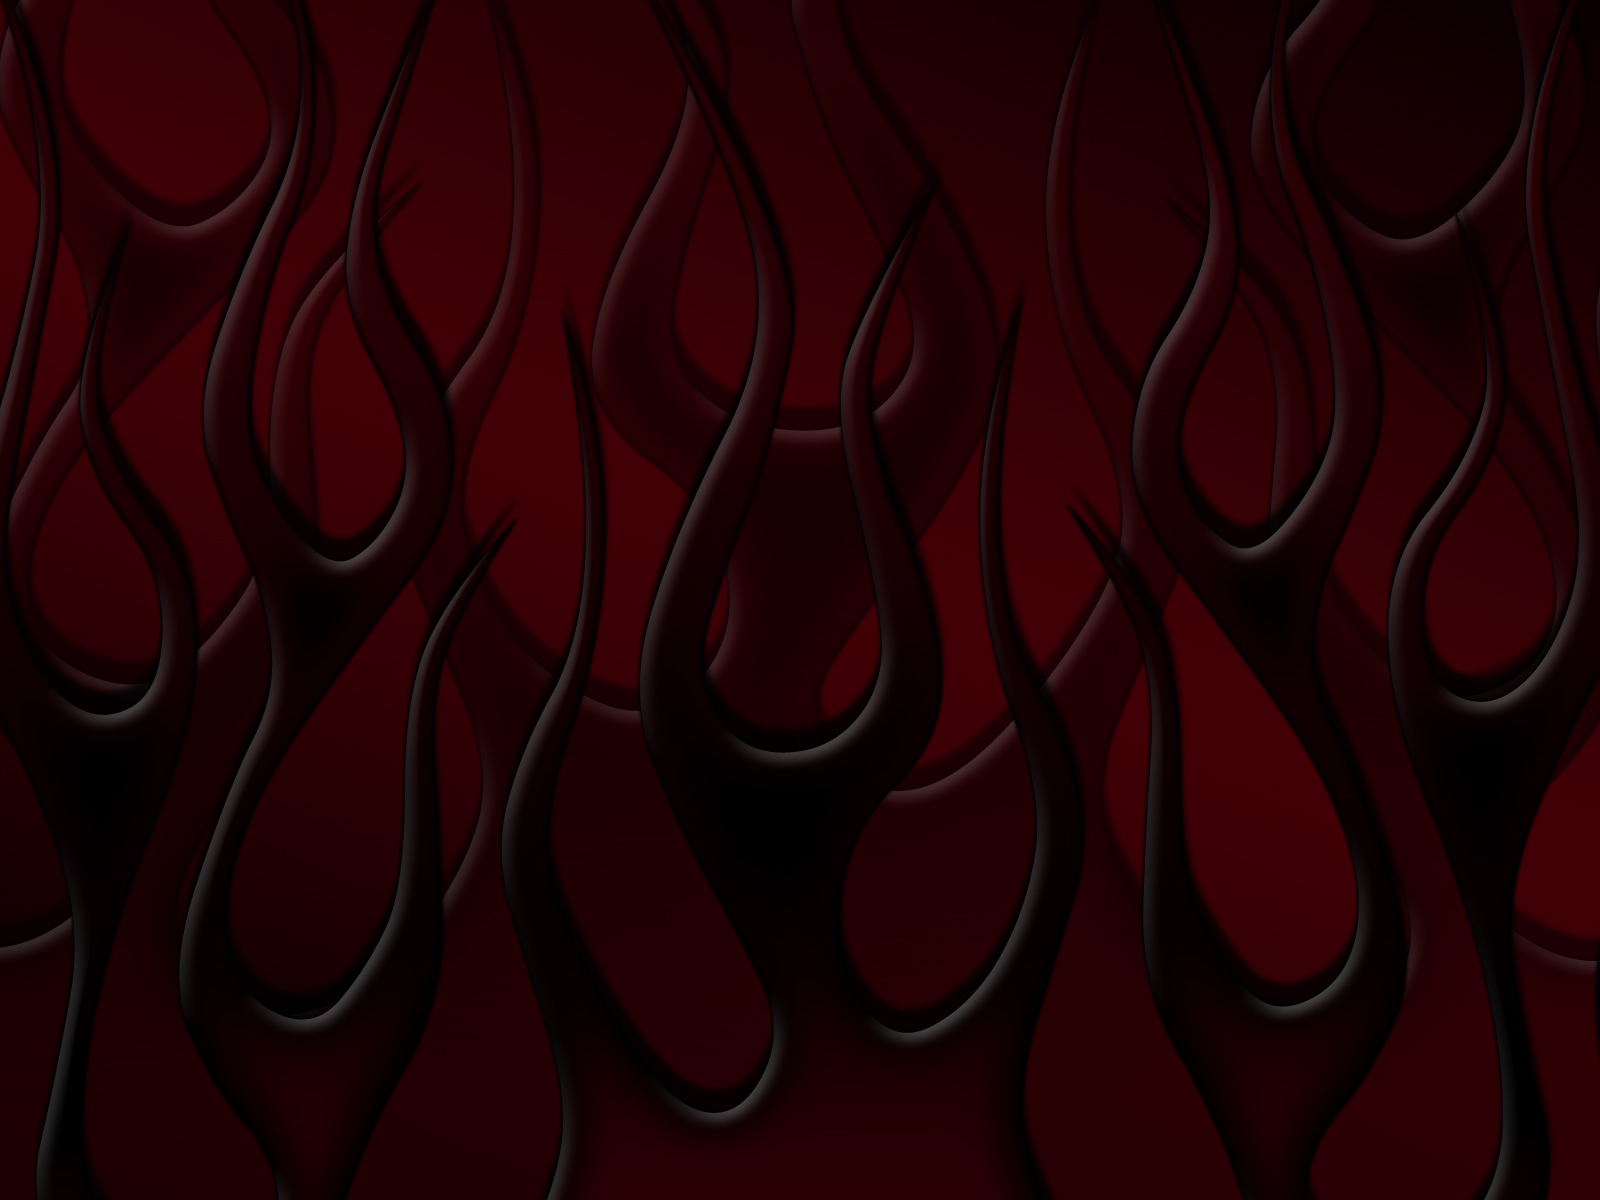 Flames   black and red by jbensch on